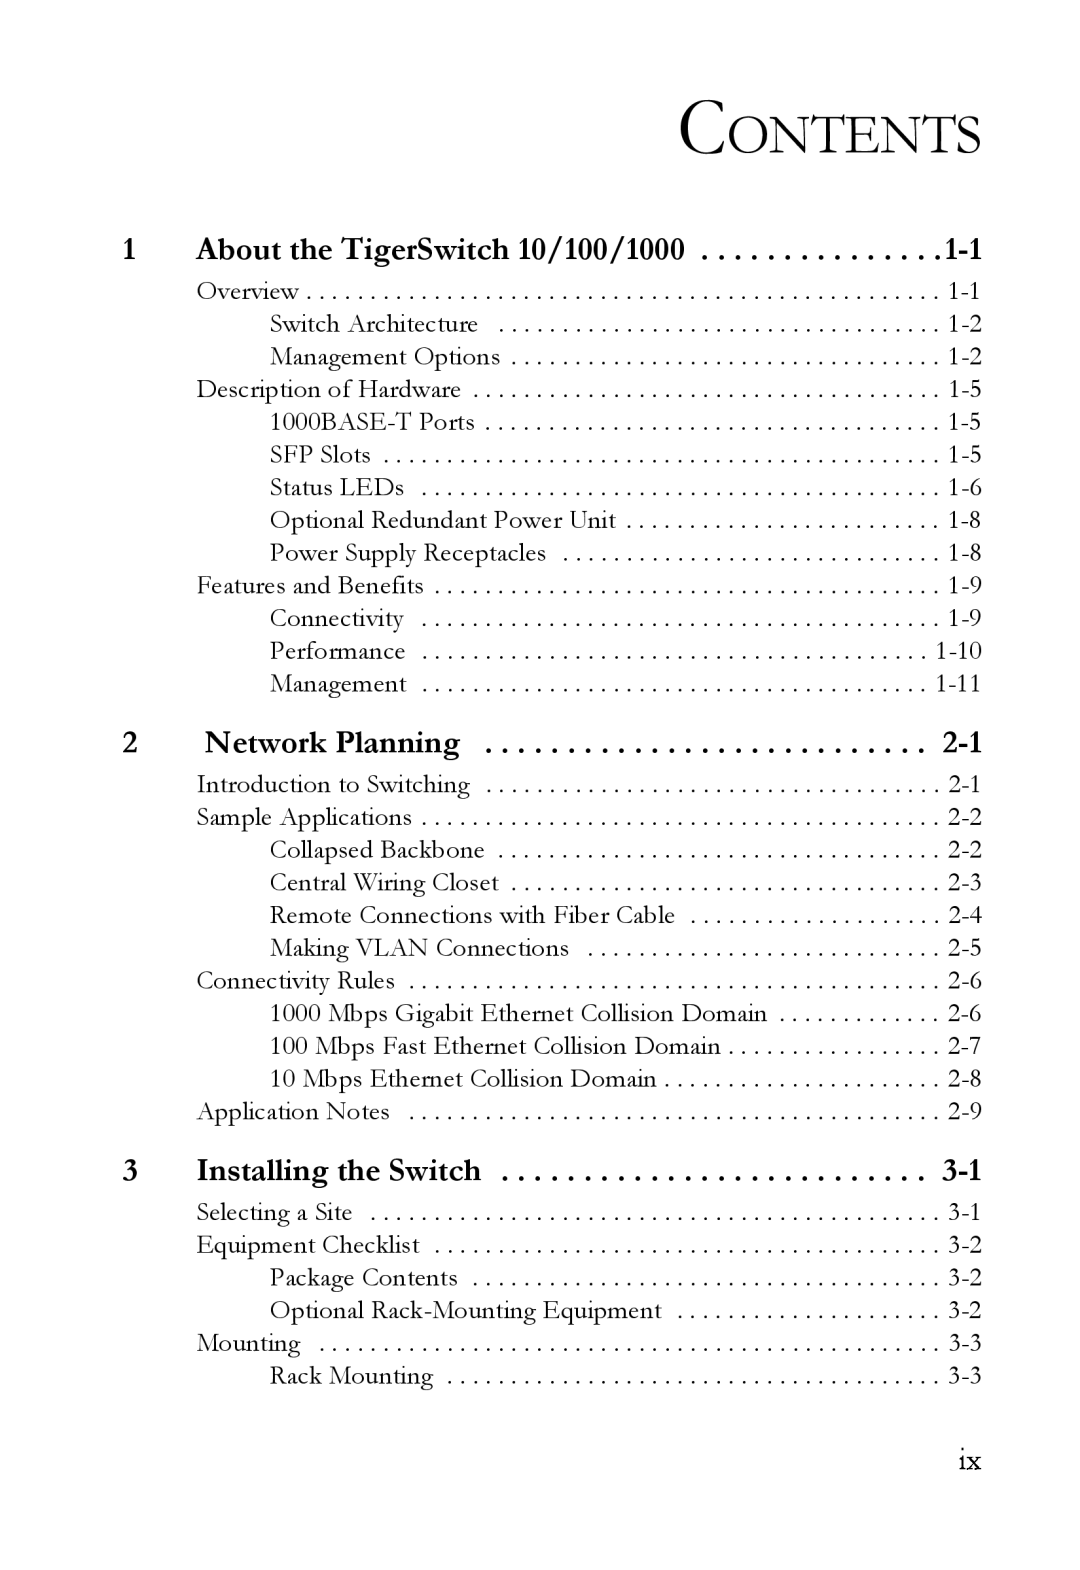 SMC Networks SMC8624T manual Contents, About the TigerSwitch 10/100/1000, Network Planning, Installing the Switch 